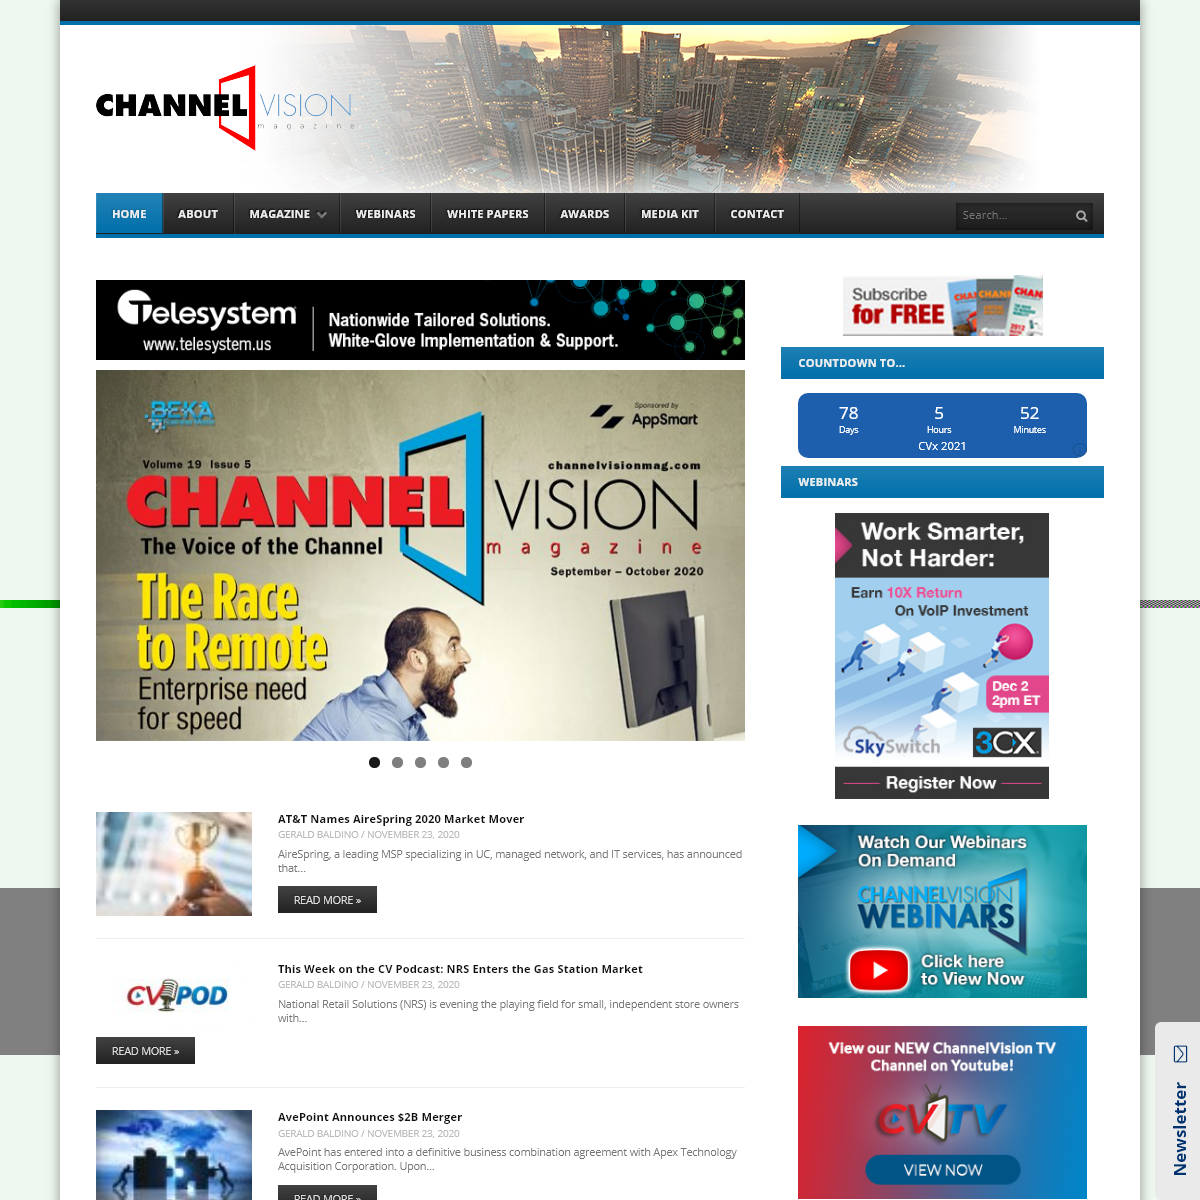 A complete backup of channelvisionmag.com